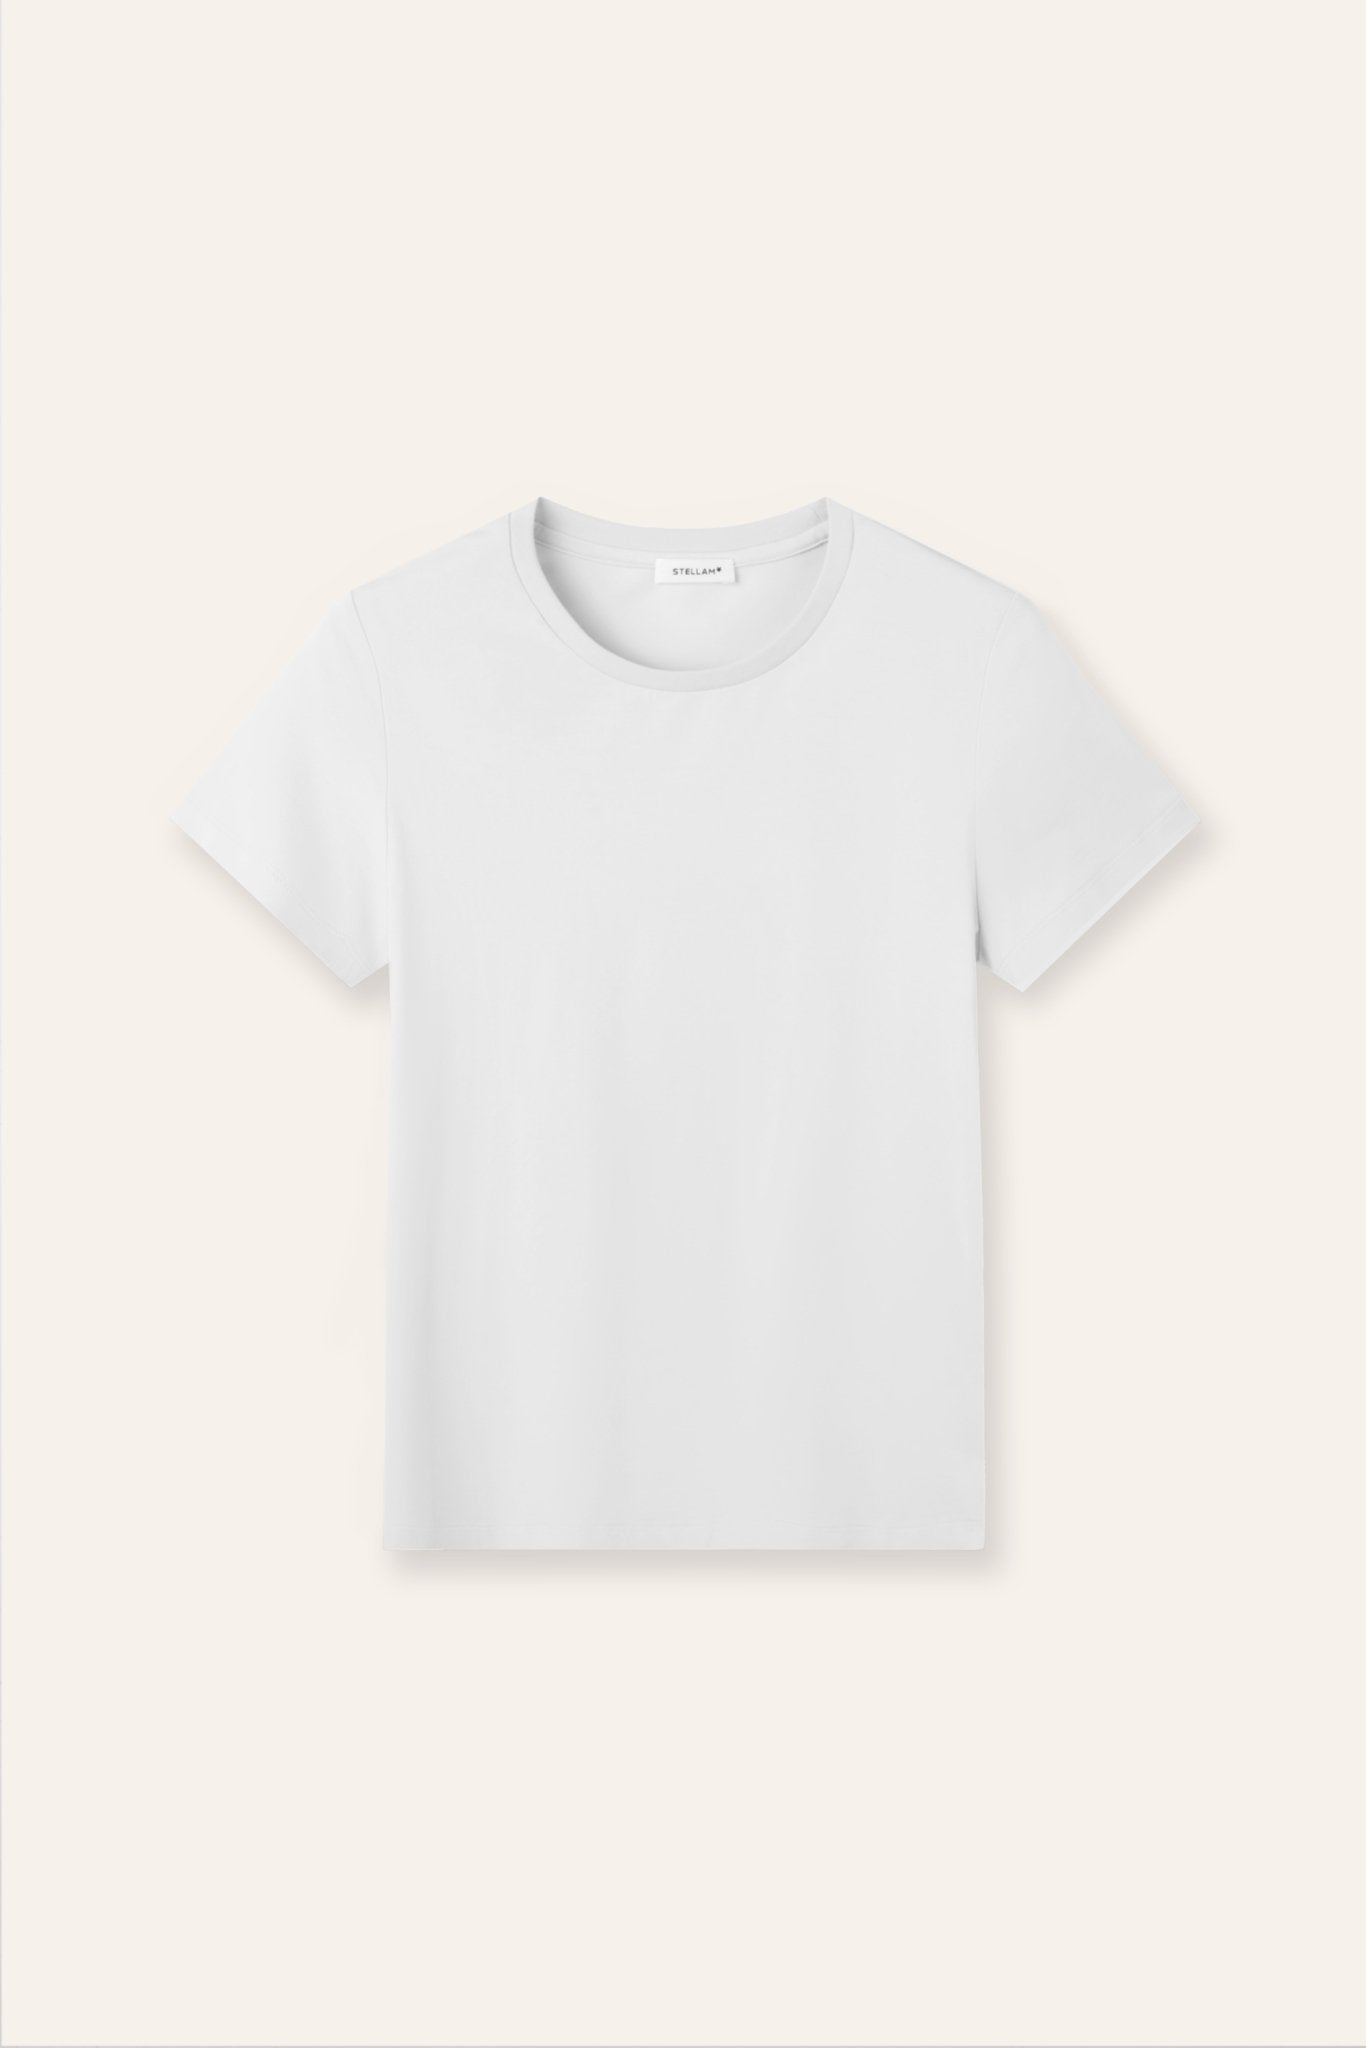 SIGNATURE relaxed jersey tee (White) - STELLAM